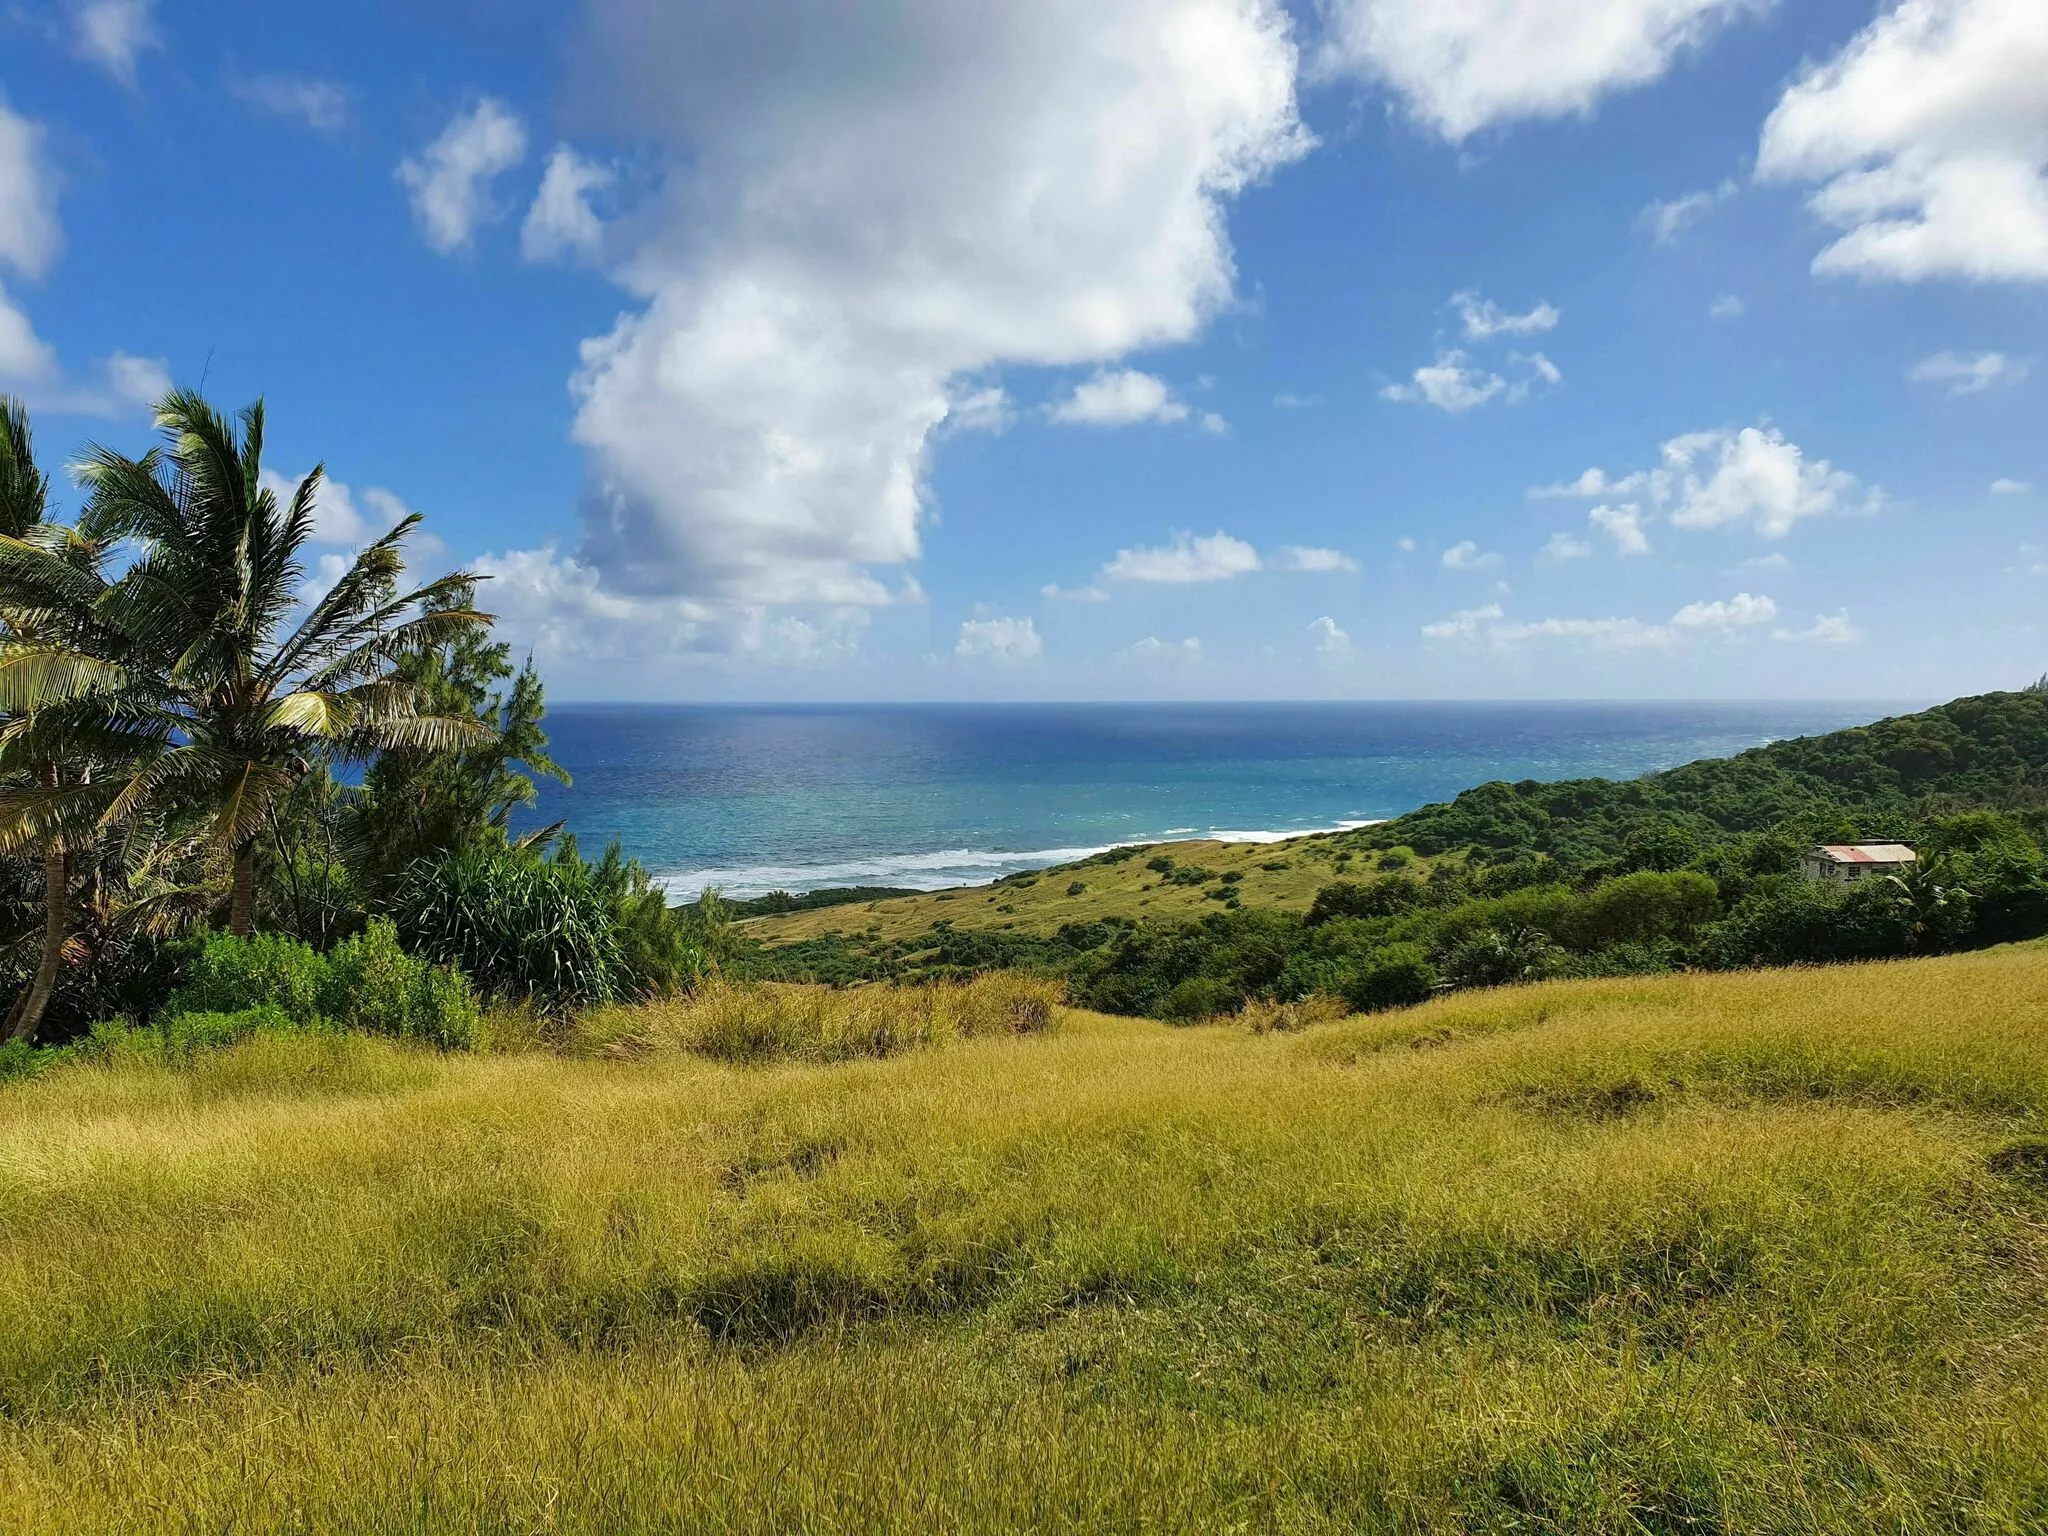 Barclays Park via Chalky Mount in Barbados, Caribbean | Trekking & Hiking - Rated 0.7